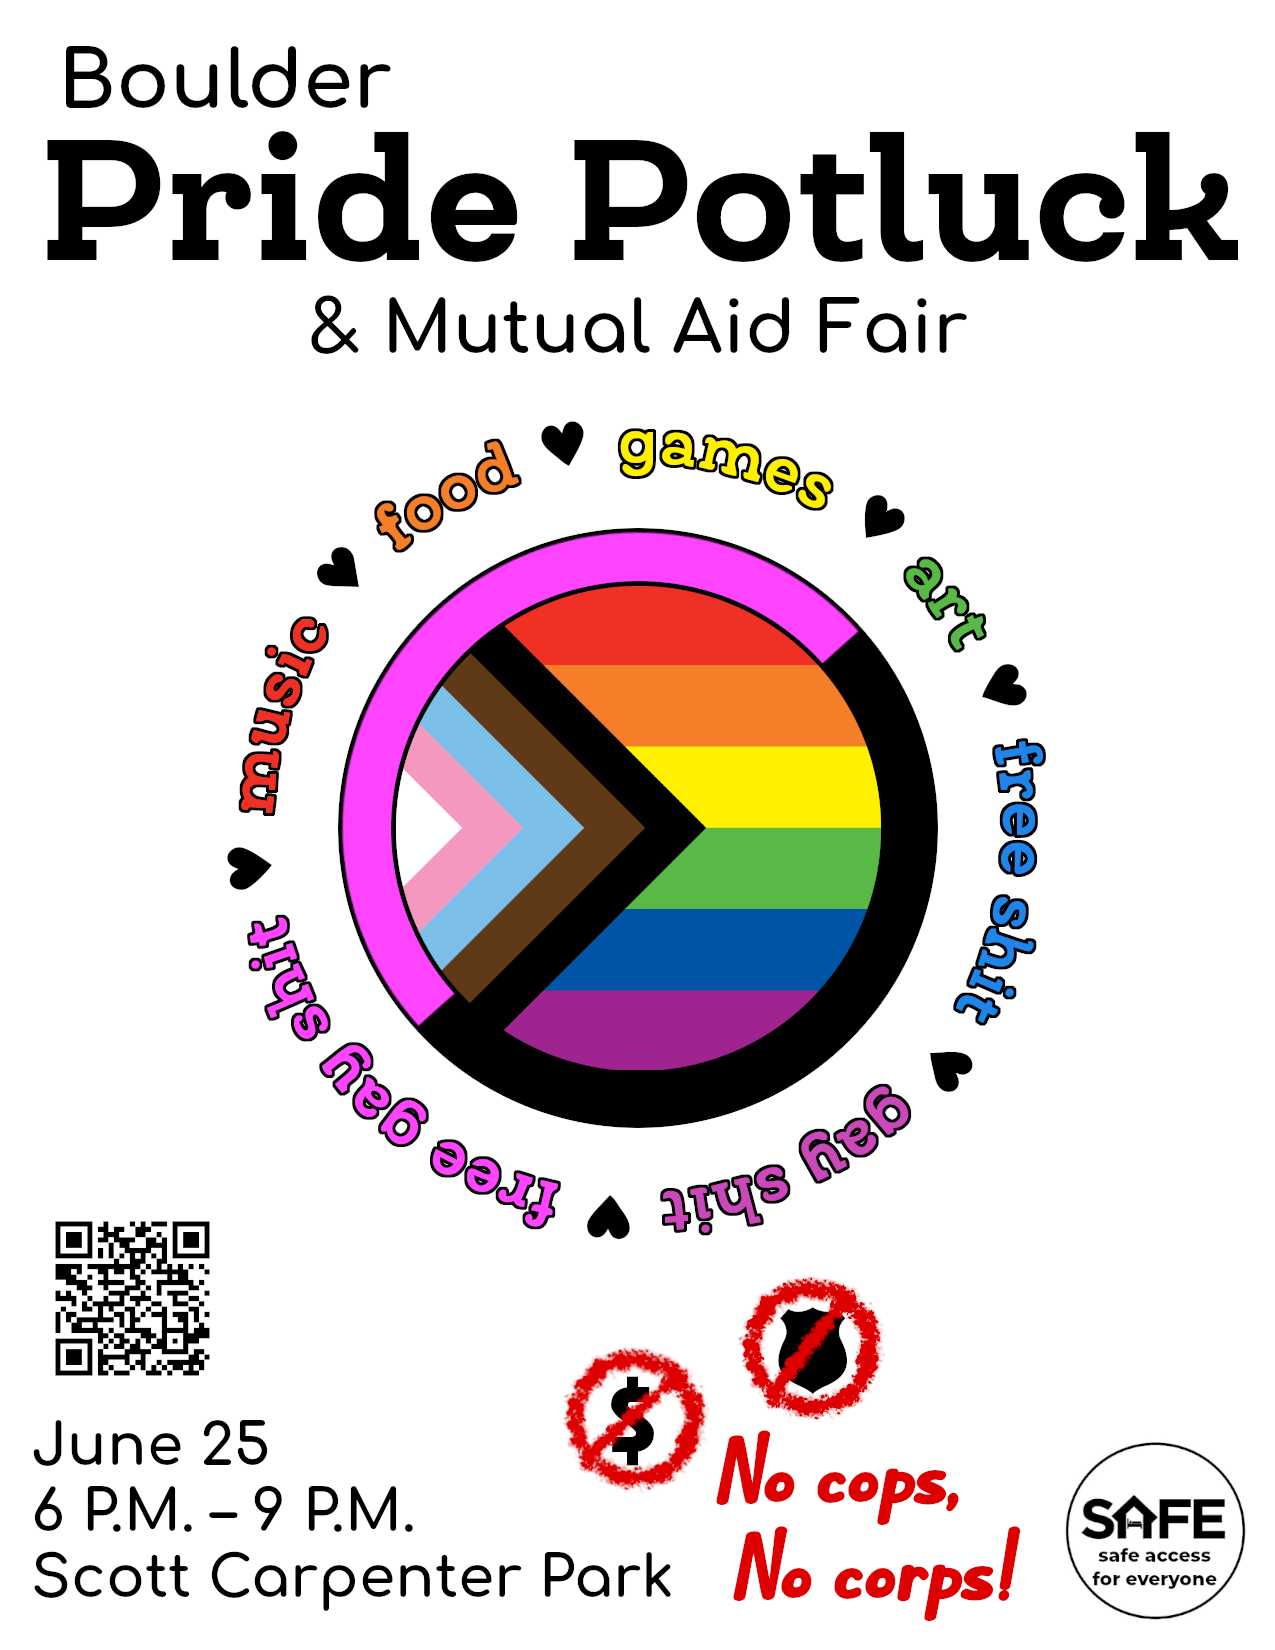 Flyer with text "Boulder Pride Potluck & Mutual Aid Fair, June 25, 6 P.M. – 9 P.M., Scott Carpenter Park." In the middle of the image is a circular progress pride flag ringed with a pink and black queer anarchist flag. Around the flags is a ring of rainbow-colored text reading "music, food, games, art, free shit, gay shit, free gay shit." The words are separated by small hearts. The bottom of the image reads "No cops, No corps!" next to no-signs faux-spray-painted over a police badge and dollar sign. Nearby is the logo for SAFE Boulder.